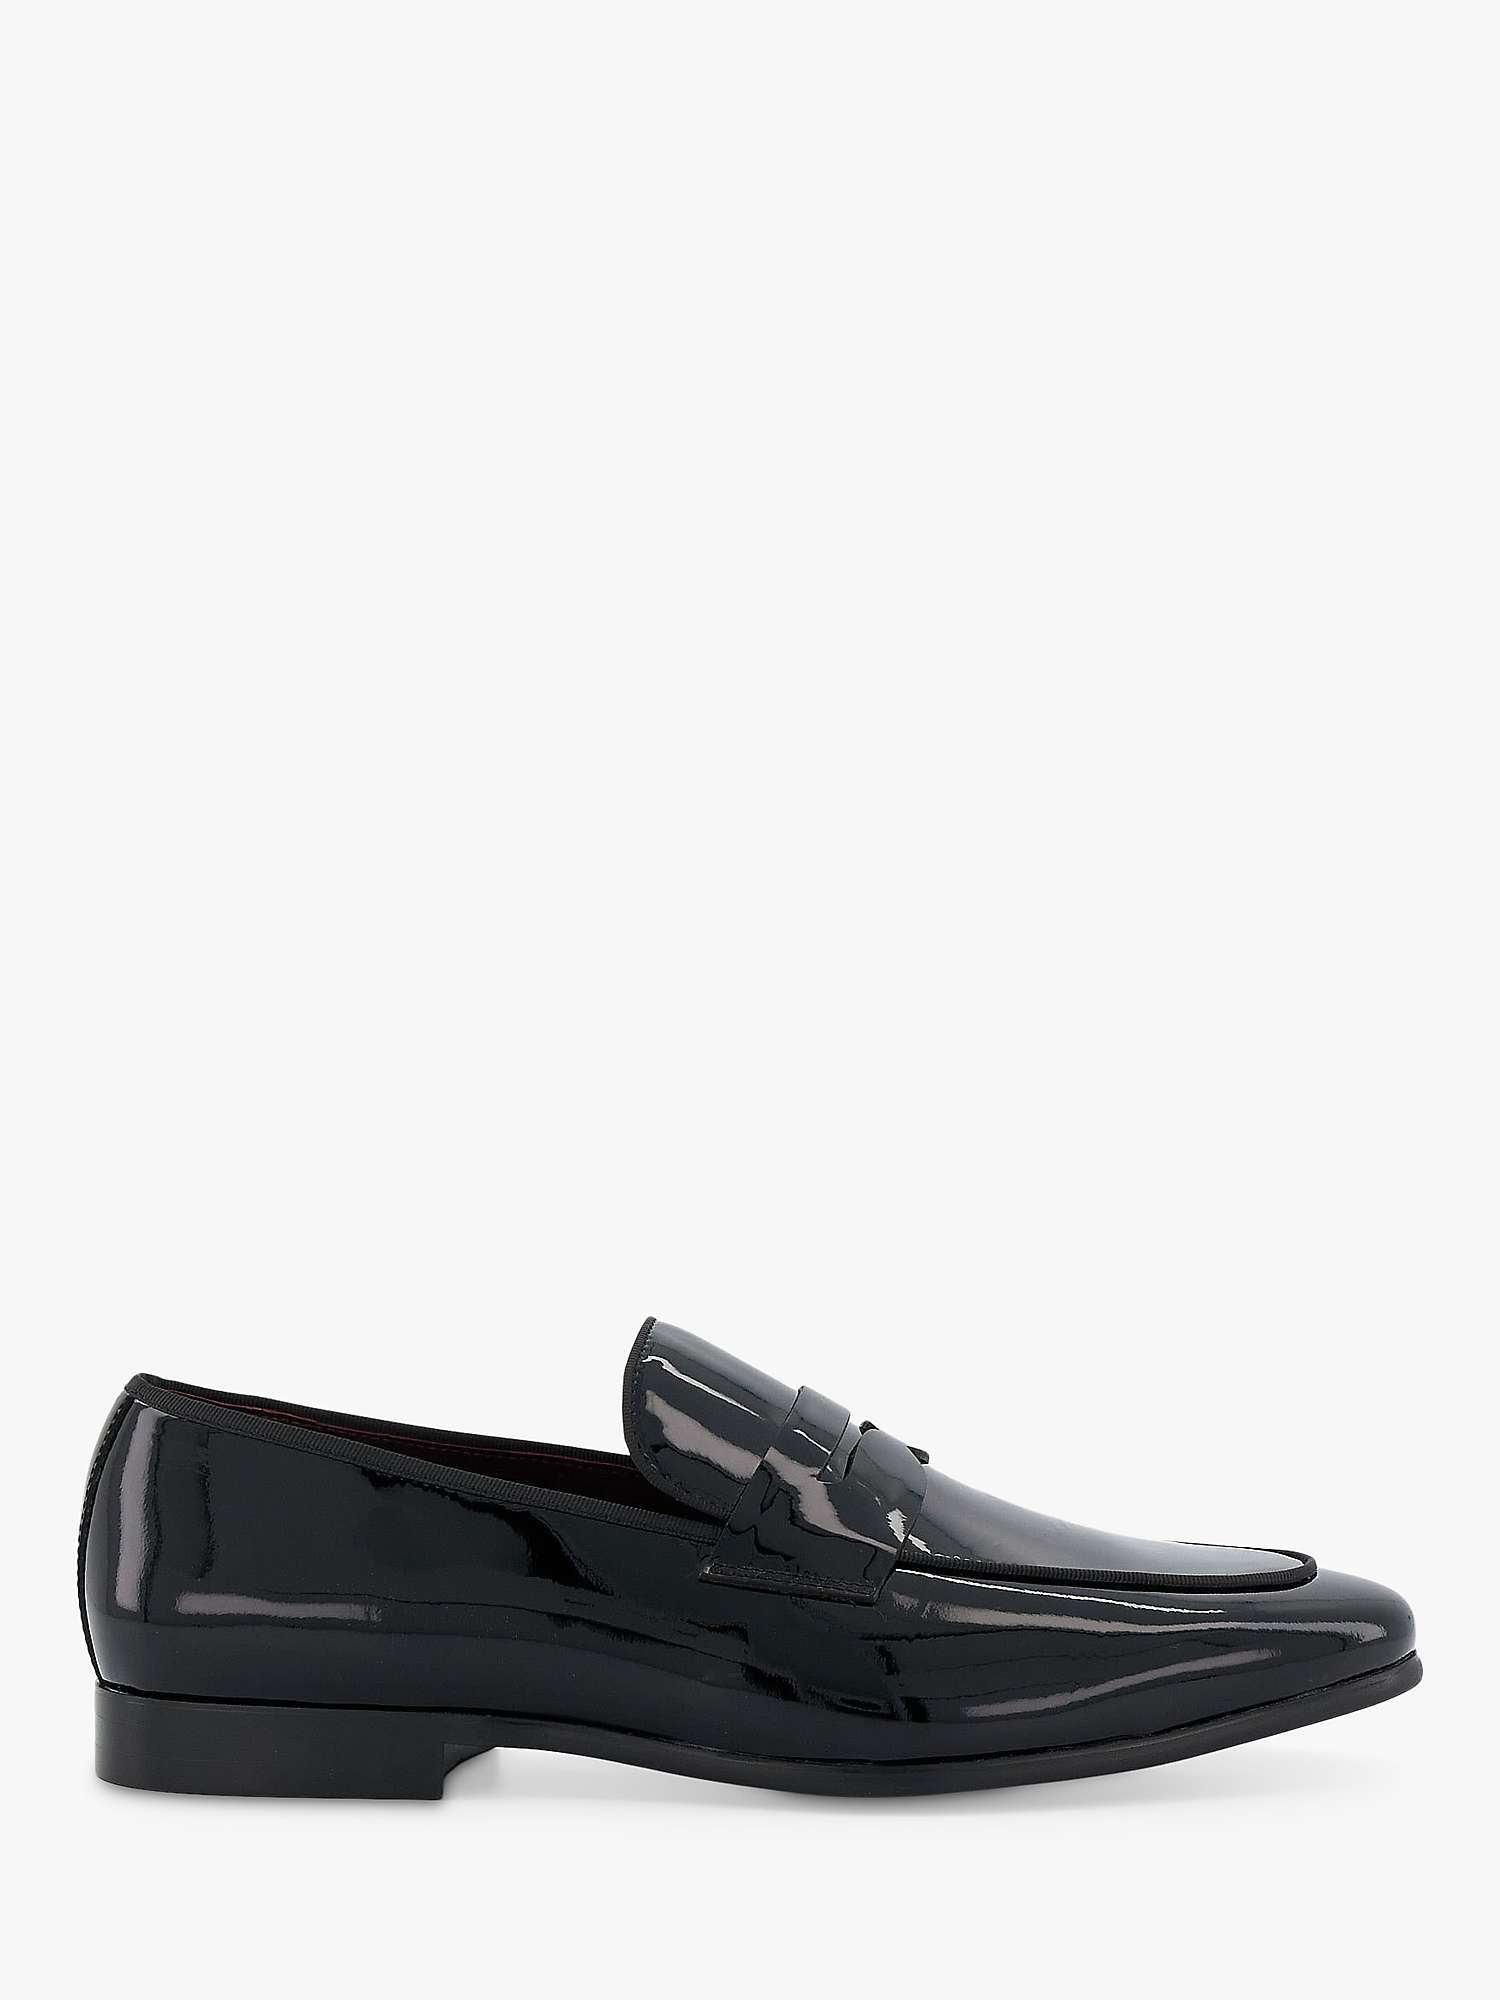 Dune Sterlling Patent Penny Loafers, Black at John Lewis & Partners